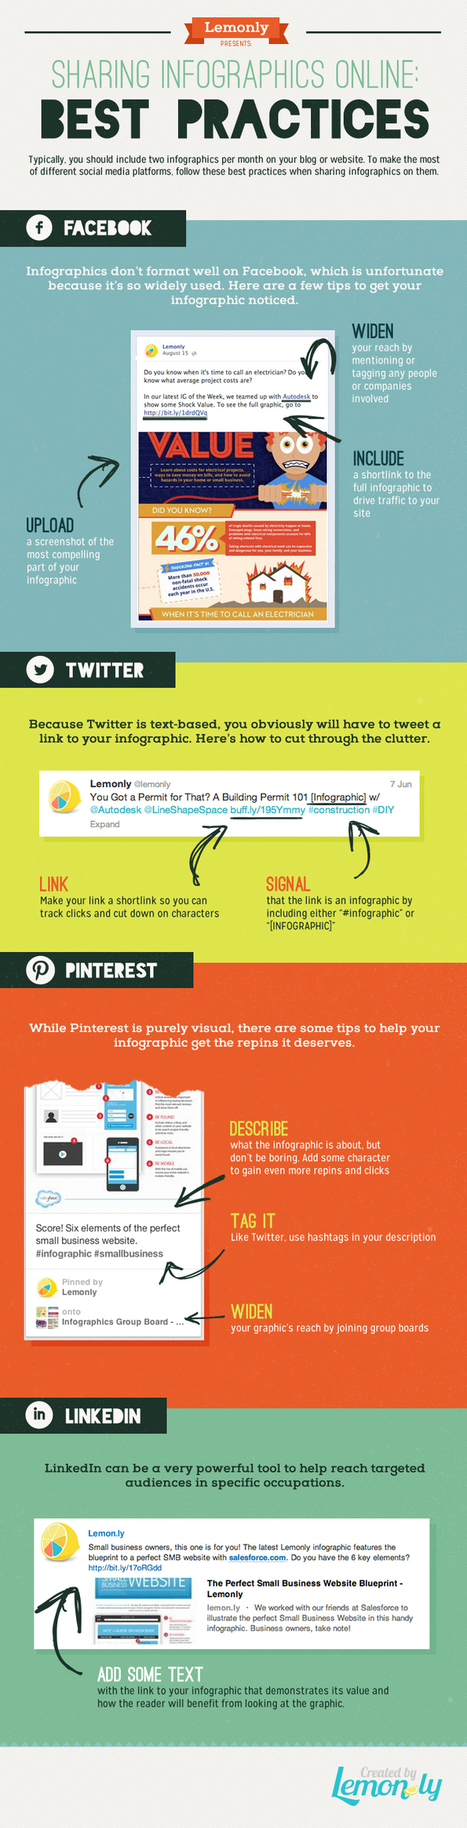 Social Media Best Practices for Infographics | Public Relations & Social Marketing Insight | Scoop.it